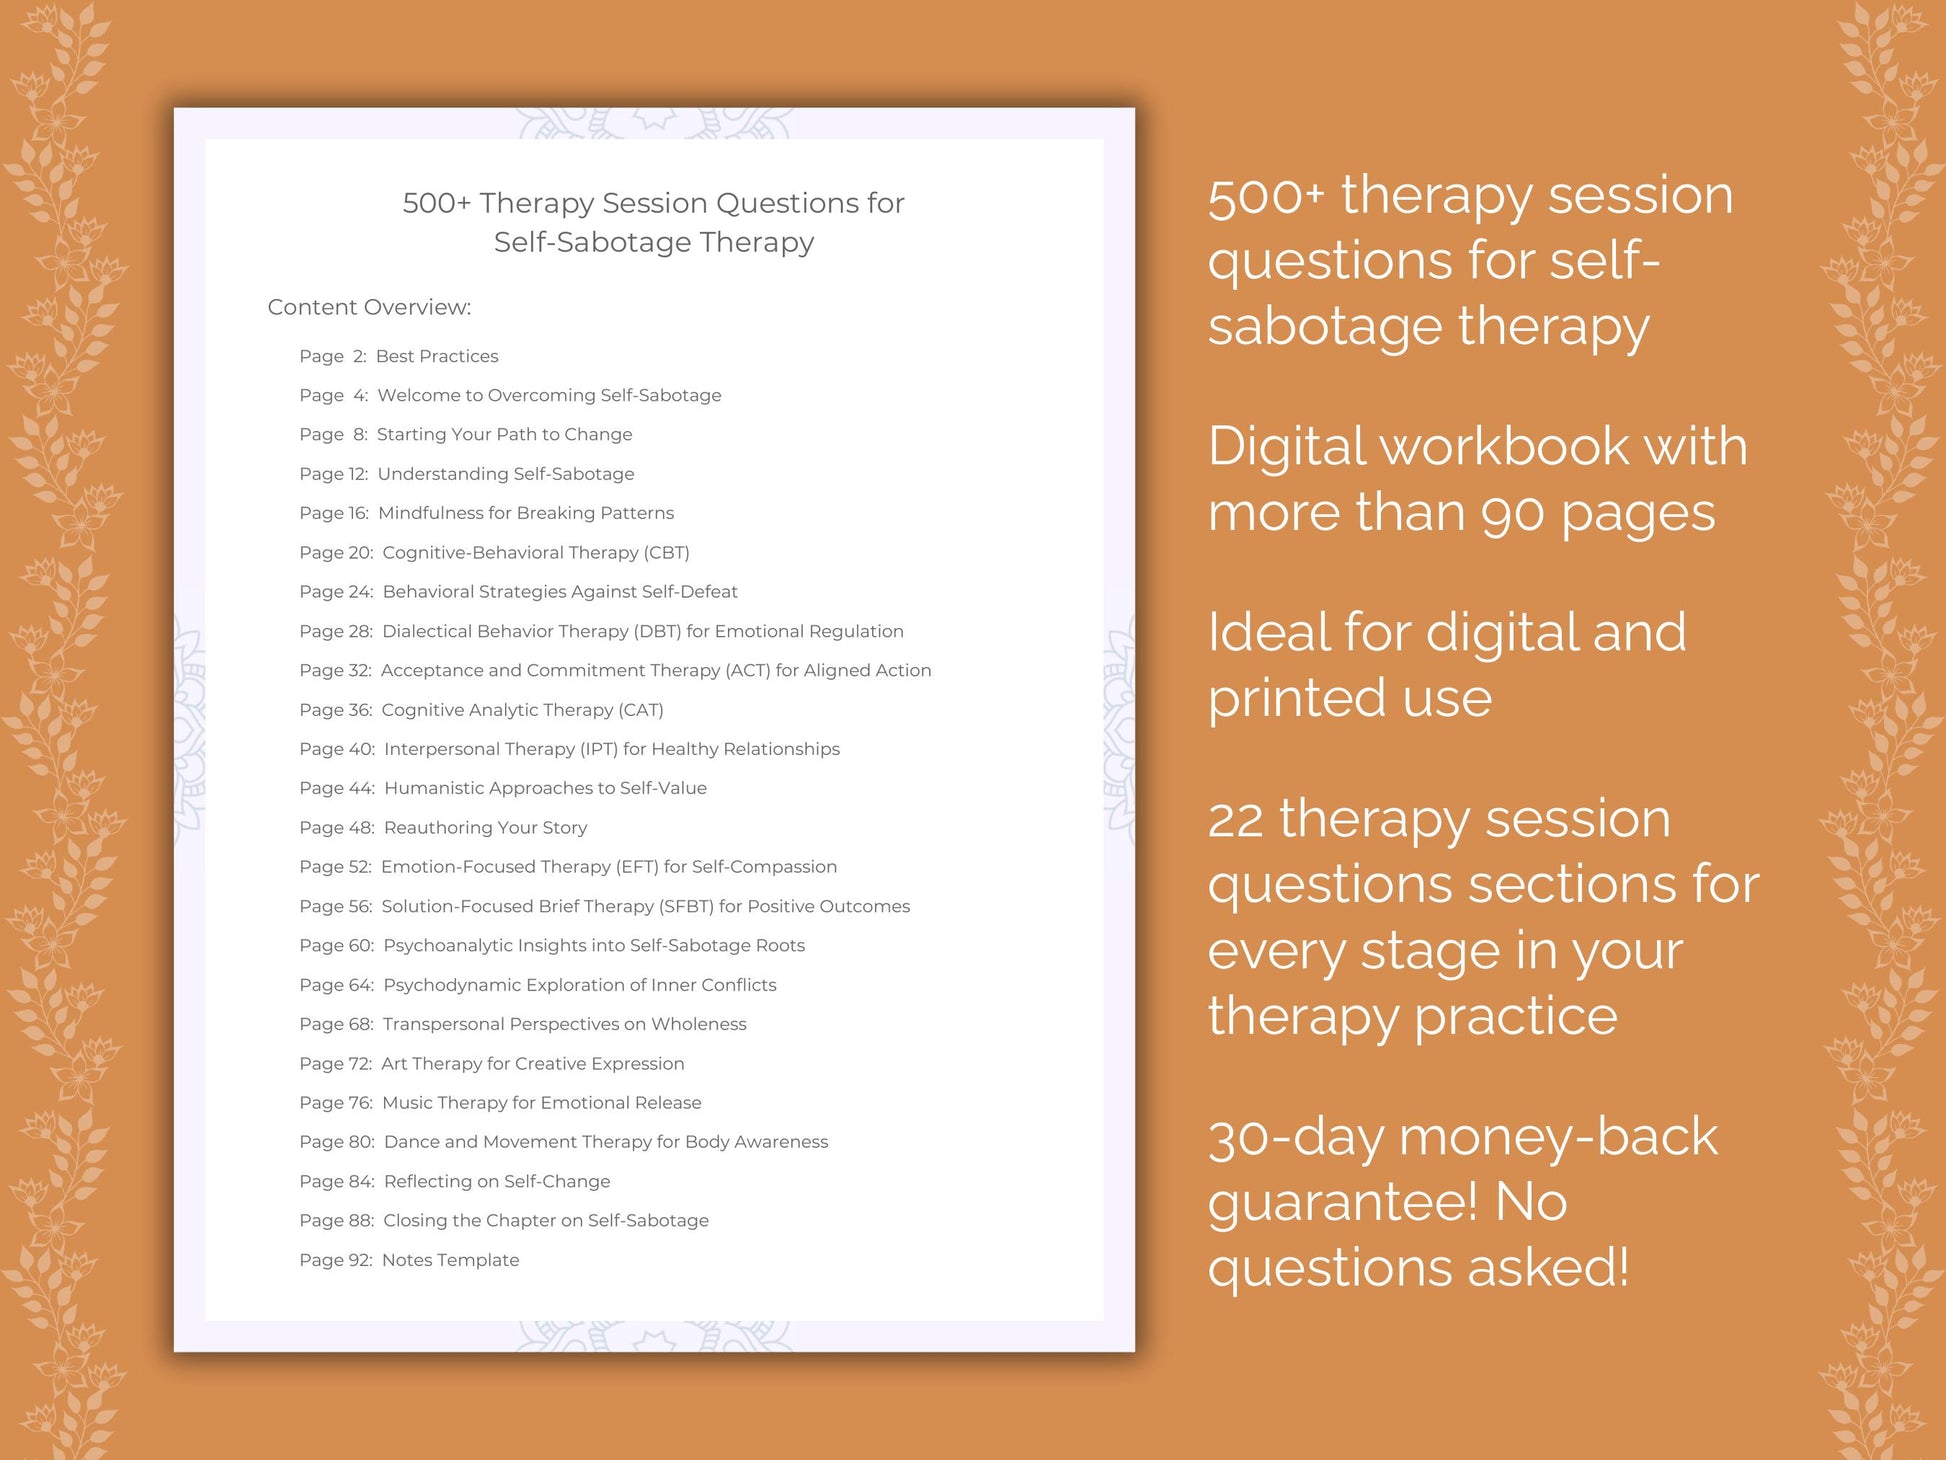 Self-Sabotage Therapy Session Questions Resource